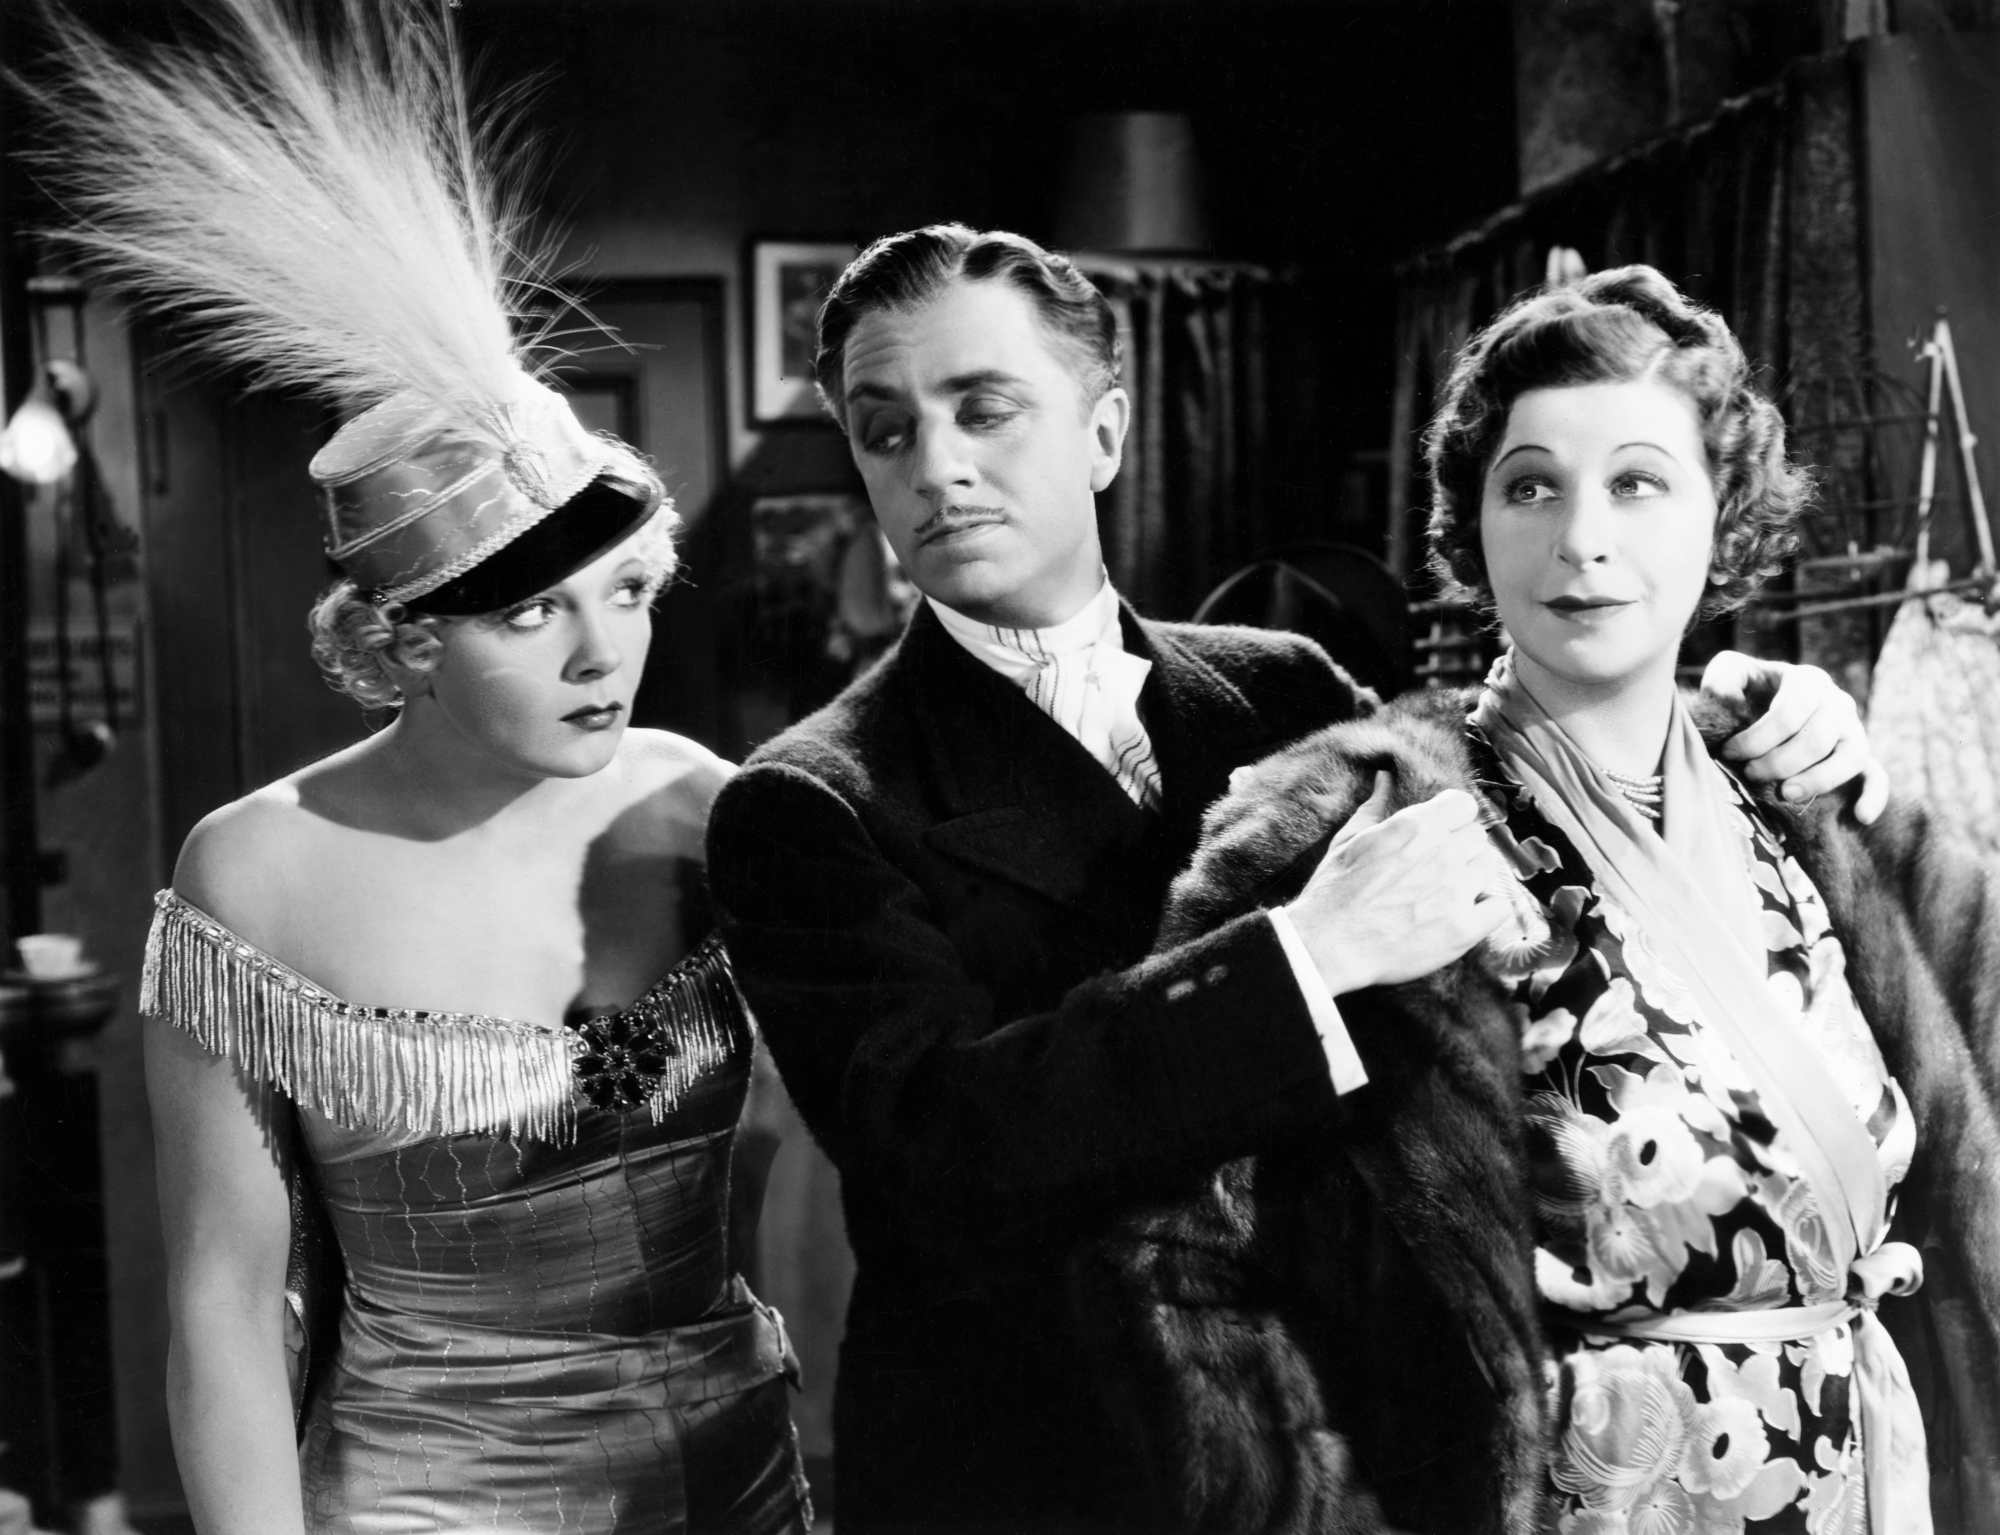 'The Great Ziegfeld' Virginia Bruce as Audrey Dane, William Powell as Florenz Ziegfeld Jr., and Fanny Brice as herself. He has his hands on Brice's shoulders, while Bruce looks at him.